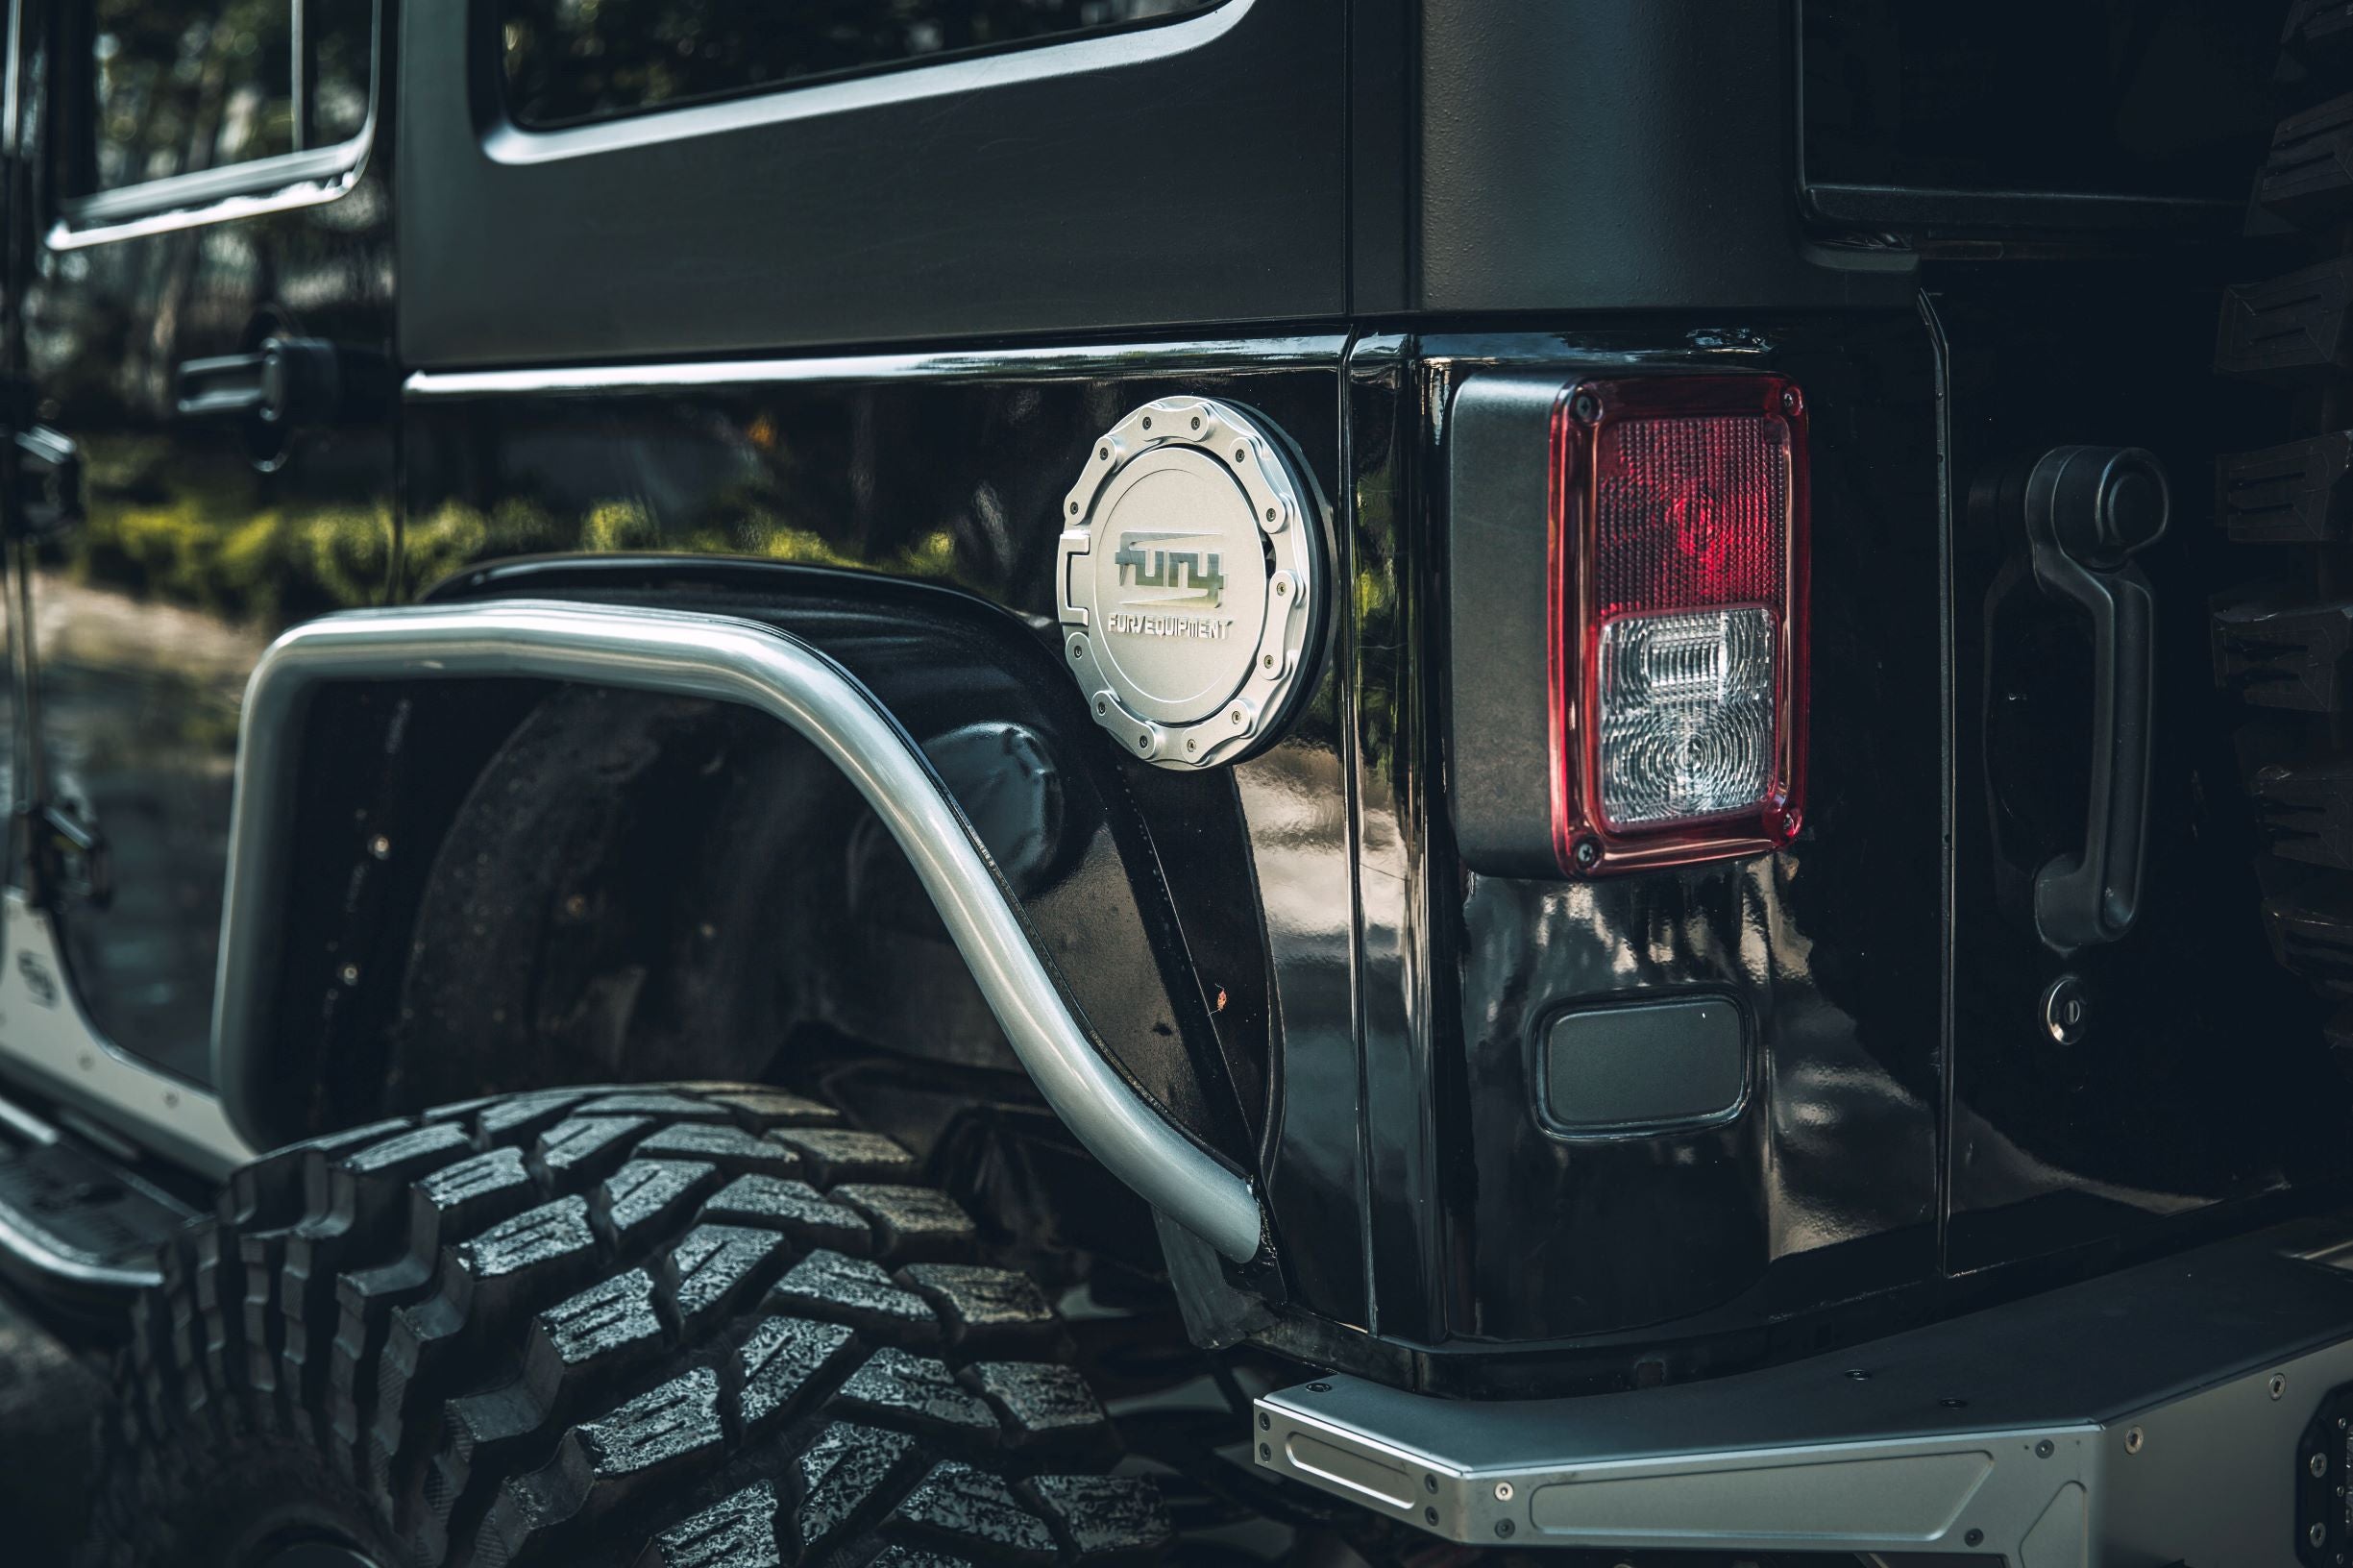 FURY Fuel Cover for Jeep Wrangler JK